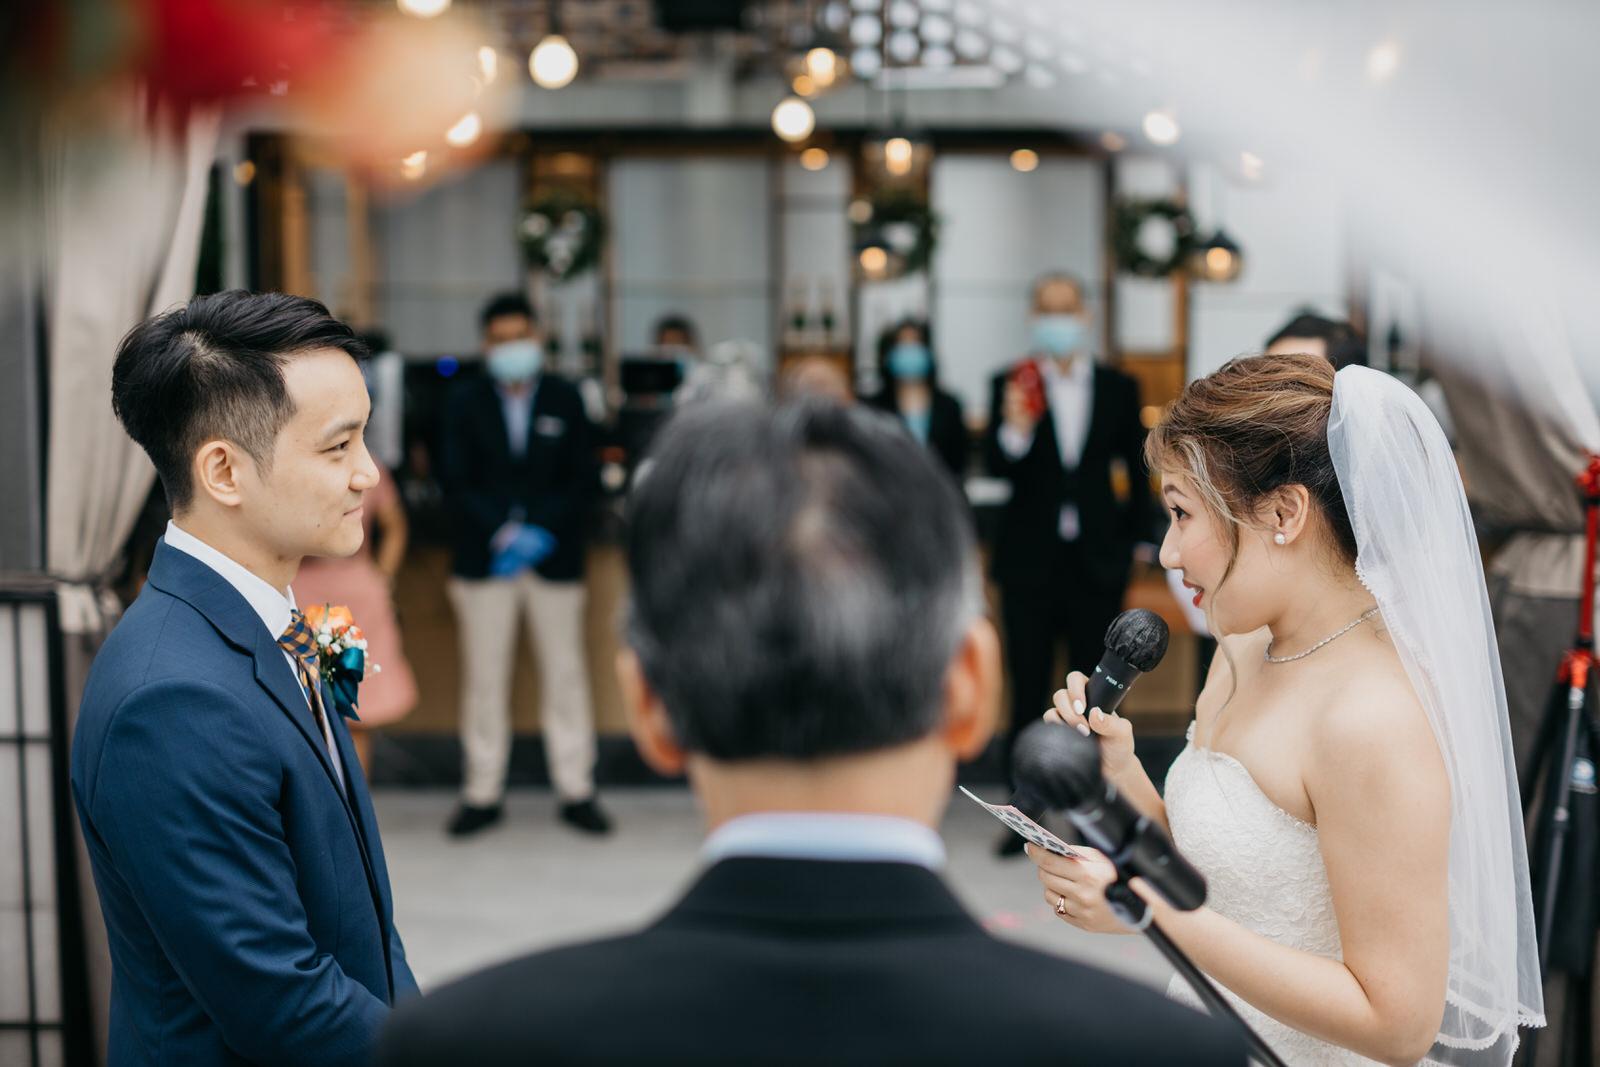 Vow Exchange Boho Deco Rooftop Poolside Wedding at Hotel Stripes Kuala Lumpur MCO2.0 Cliff Choong Photography Malaysia Covid19 ROM 